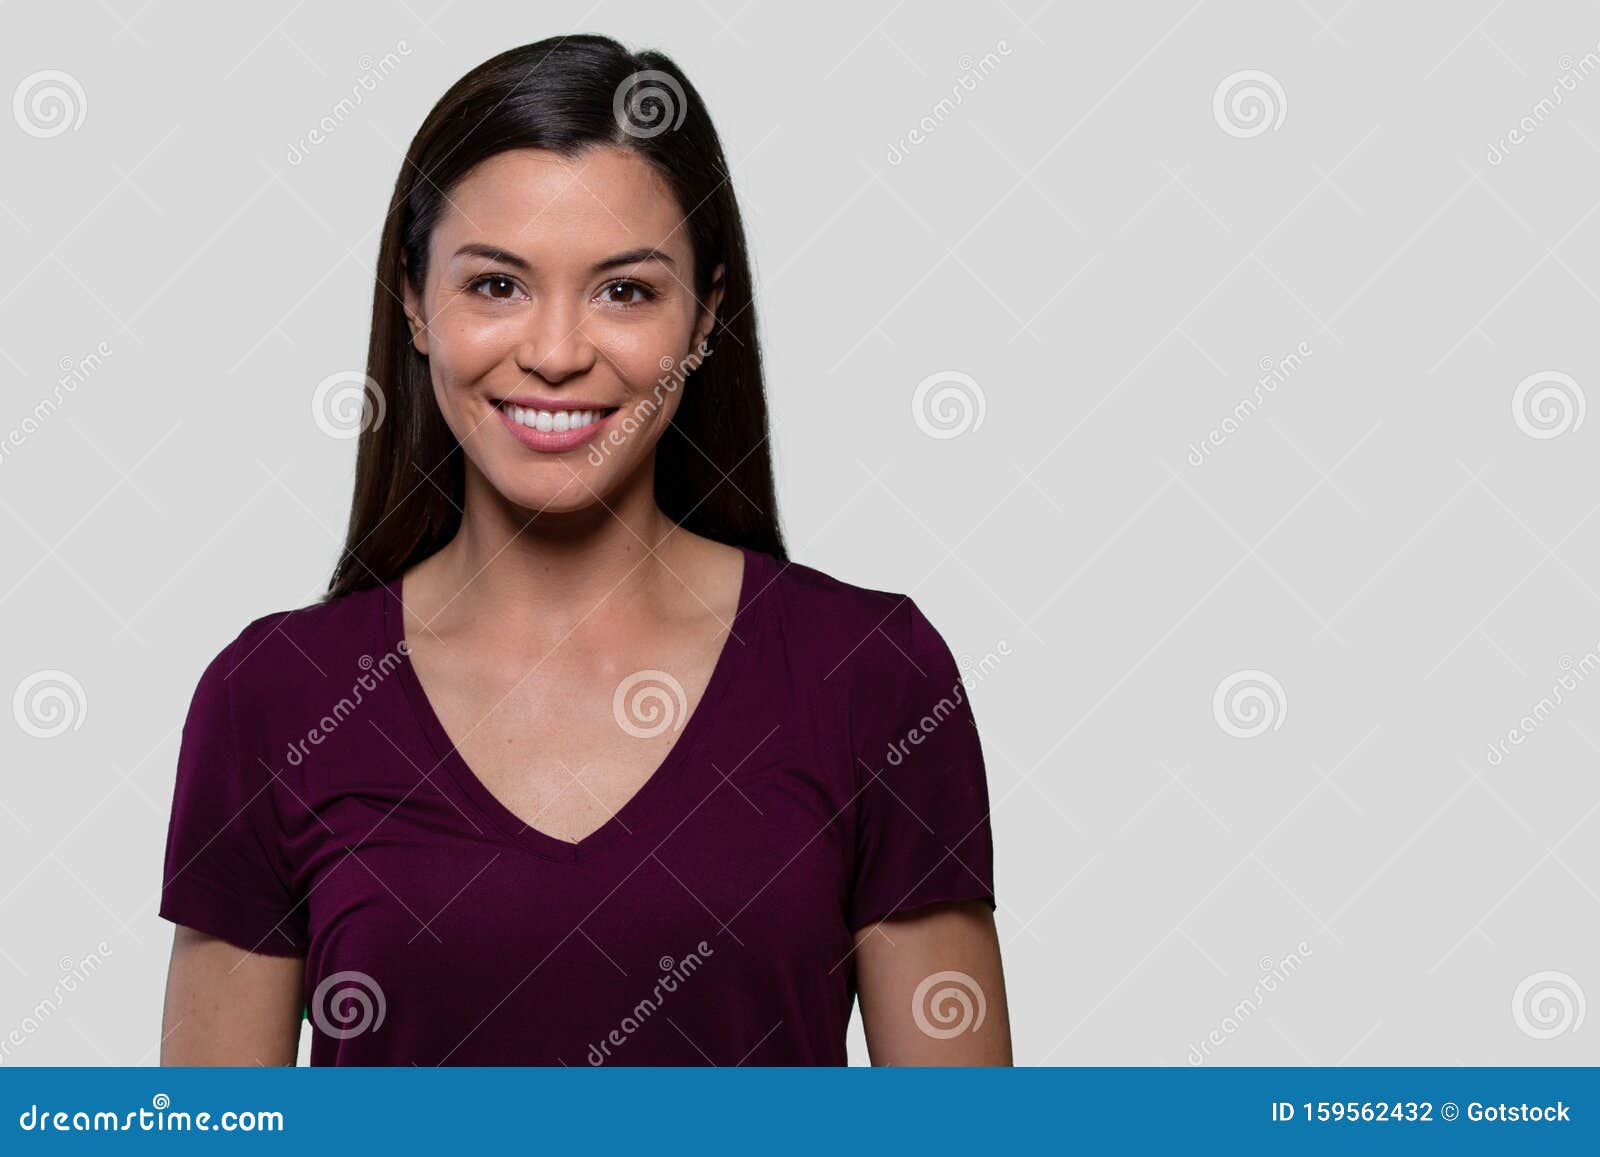 commercial headshot advertising portrait of a beautiful young asian american brunette woman with perfect white teeth smile